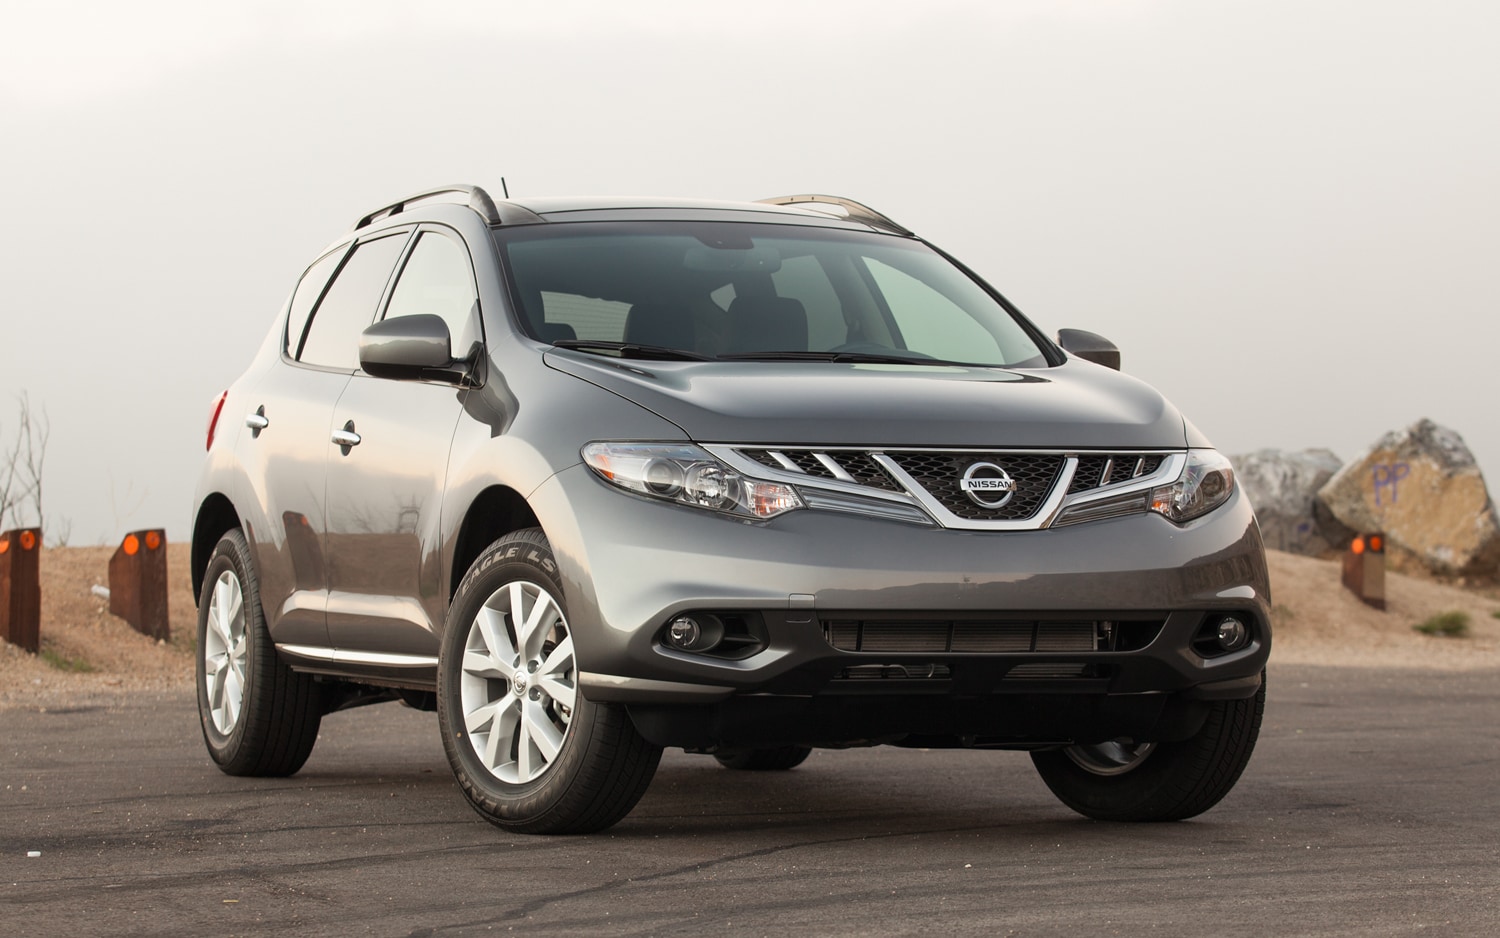 2013 Nissan Murano SV Trim Gets Value Package, Two New Colors Added